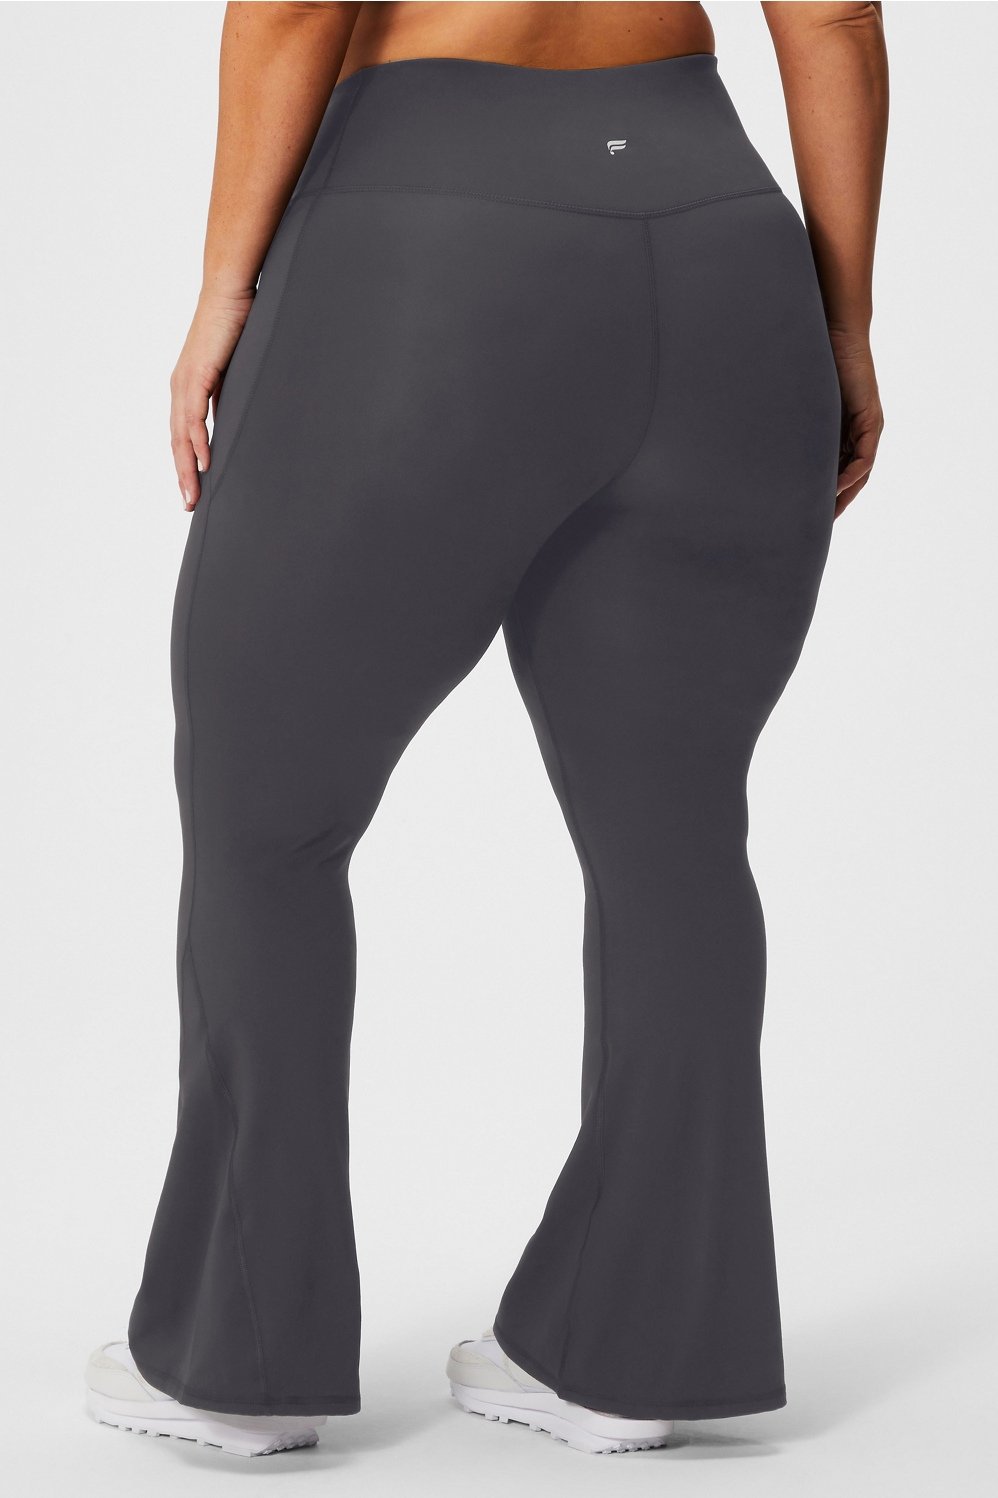 😍Elevate your style and comfort with @fabletics Flare Leggings